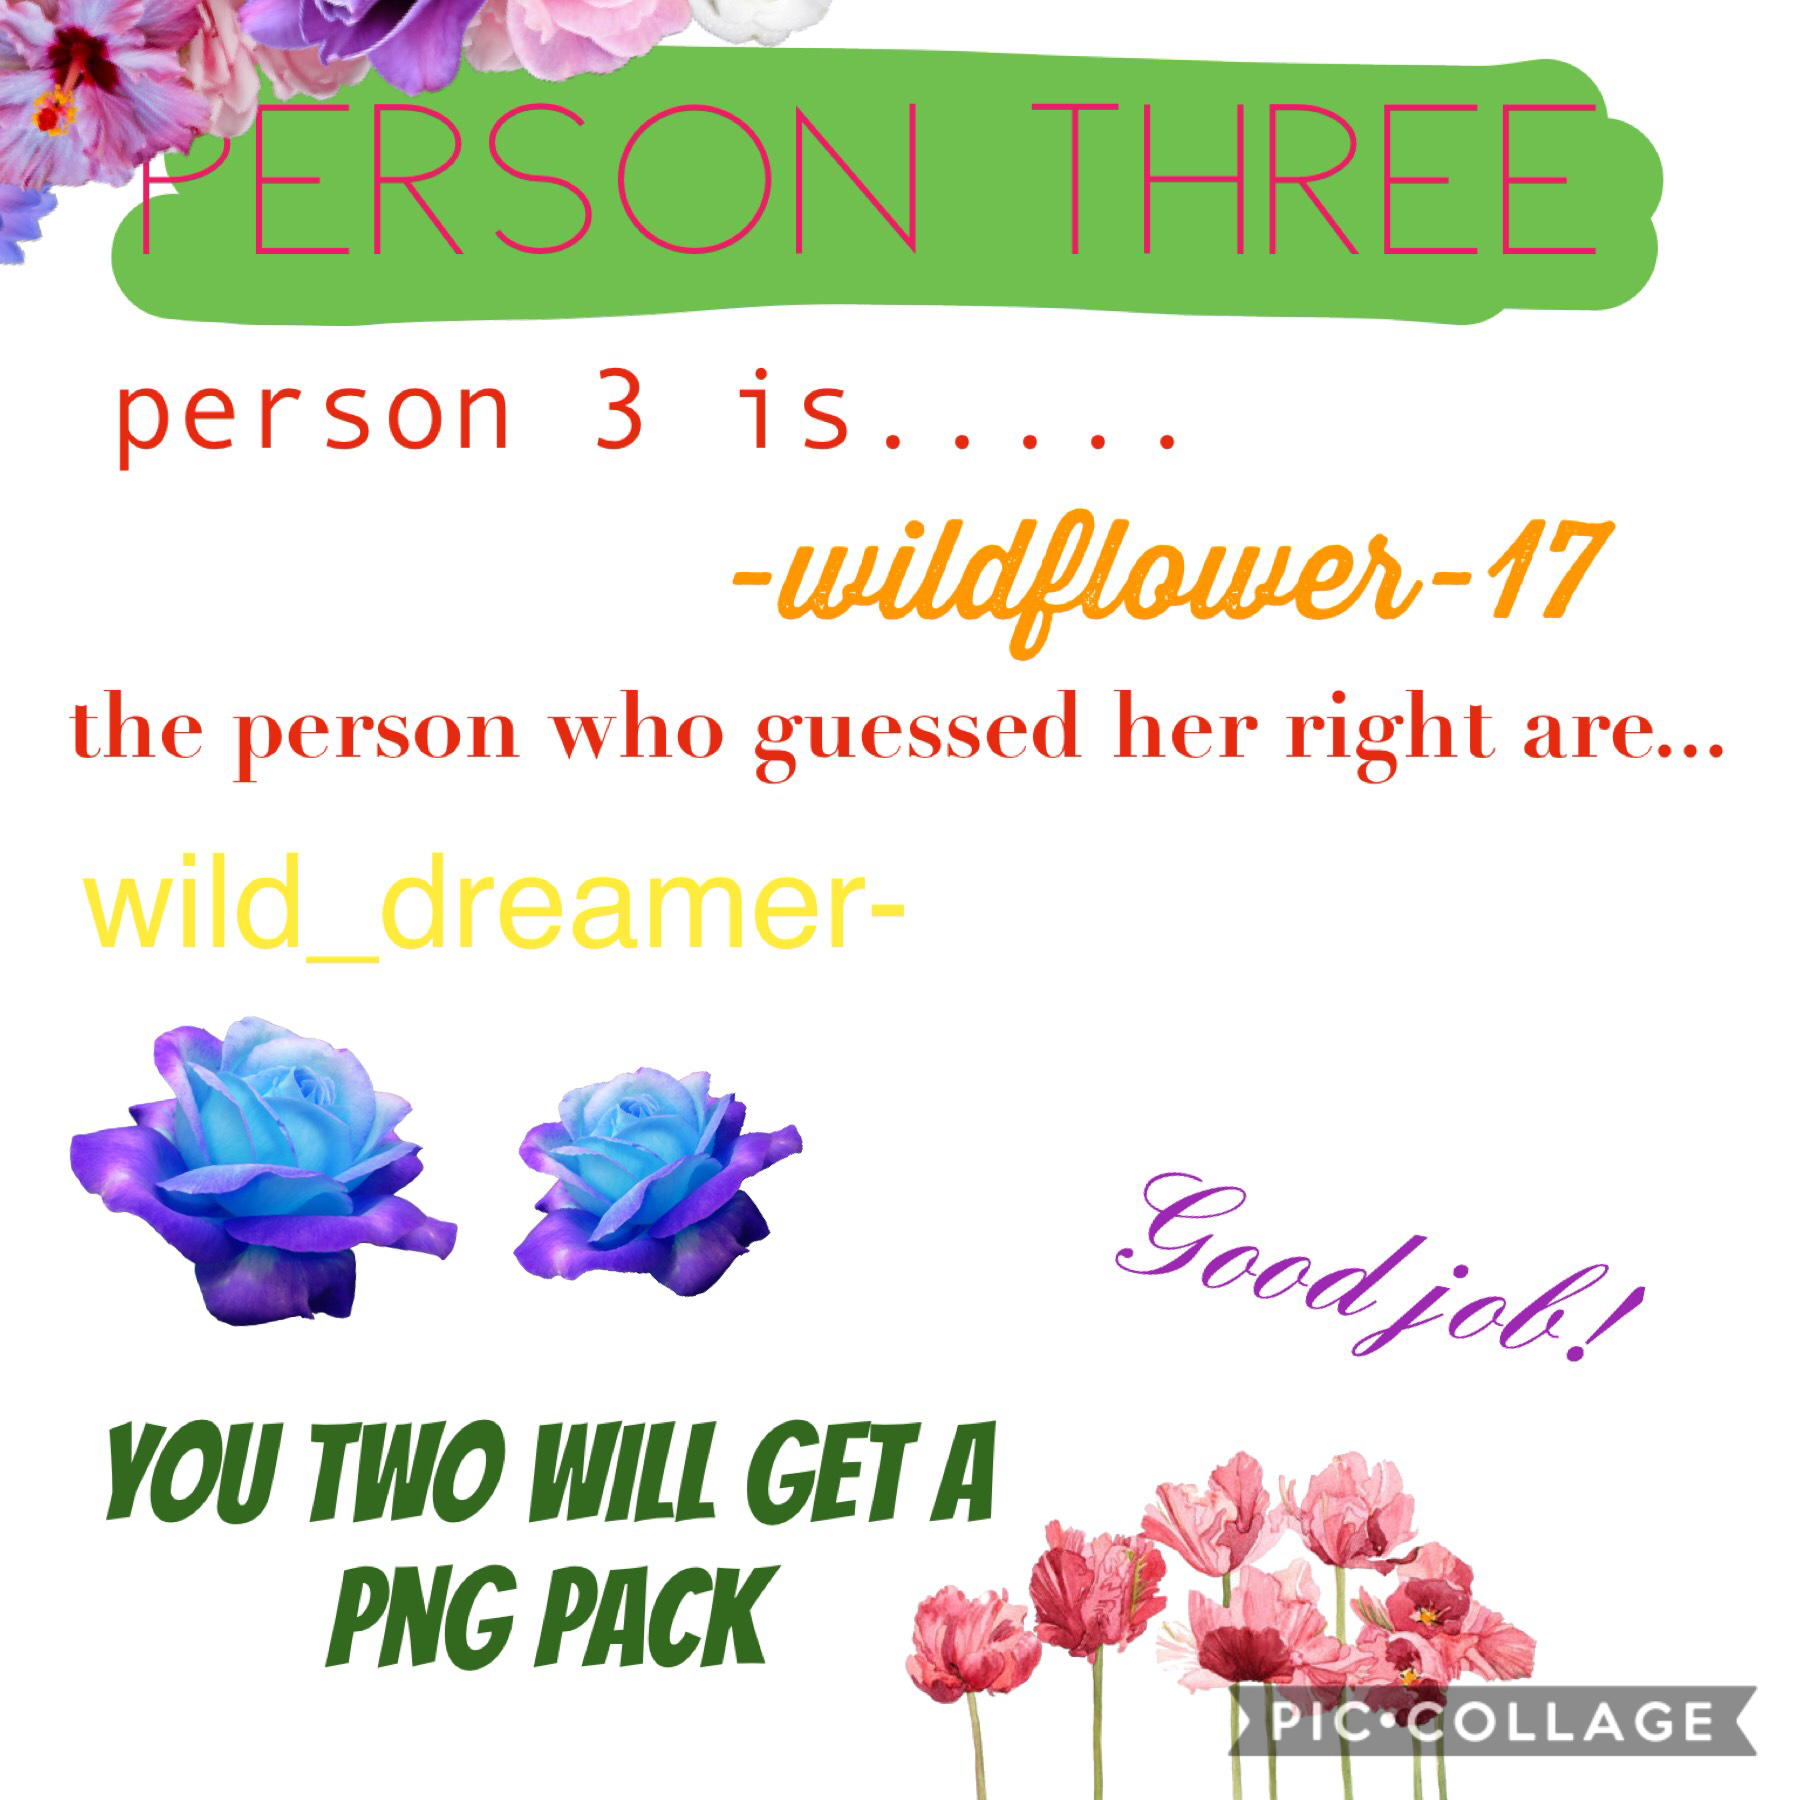 Person 3 is.... (tap)
-wildflower-17 💞
Yay 🎉